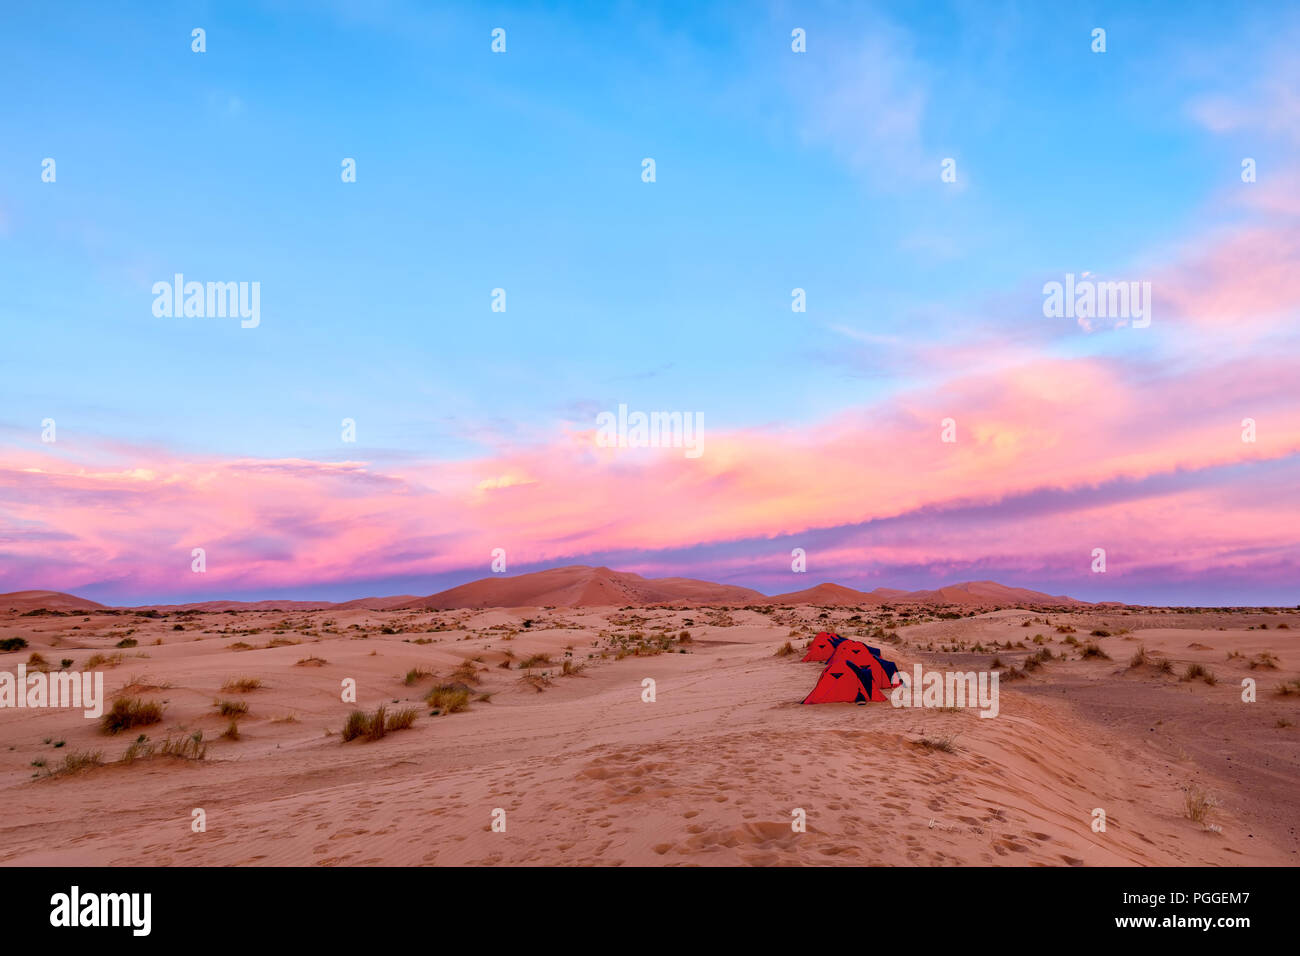 Camping in the Sahara Desert in Morocco. A row of little red tents under a colorful sunrise. Adventure travel theme. Stock Photo